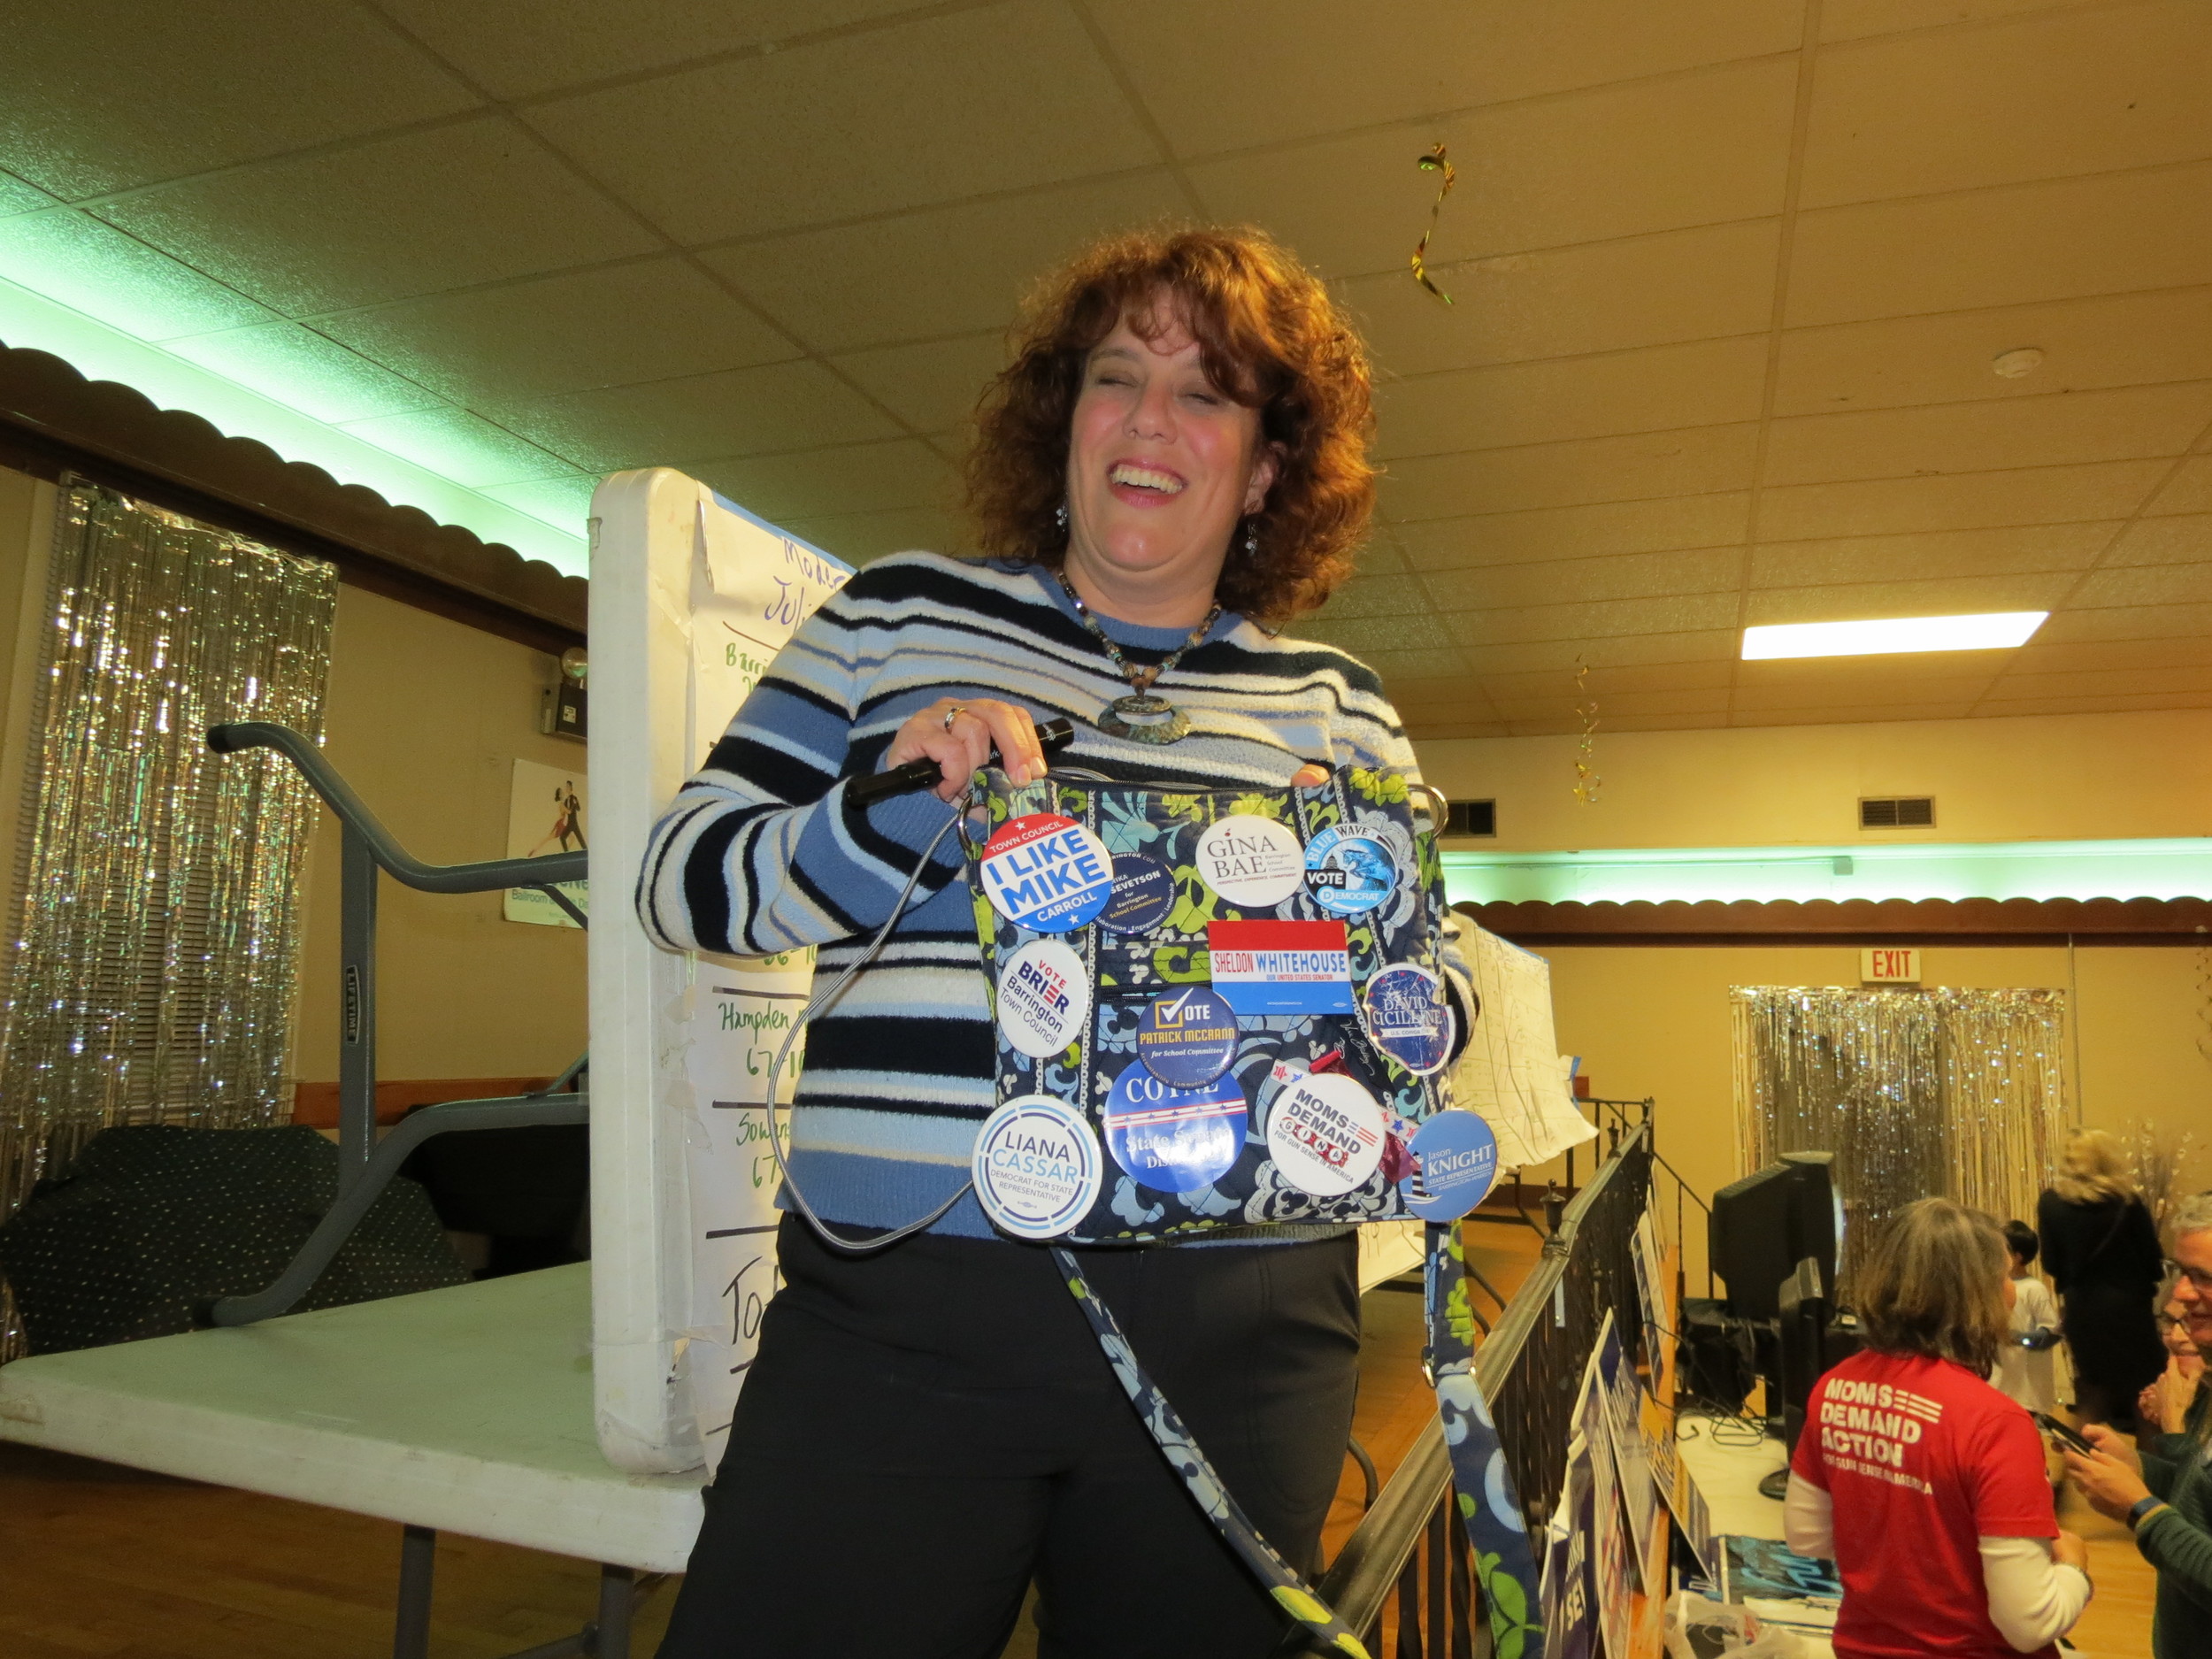 Pam Lauria, the chairwoman of the Barrington Democratic Town Committee, shows off her bag which is covered with Democratic candidates' campaign pins in this 2018 photo. Lauria is running for the District 32 seat in the RI Senate.